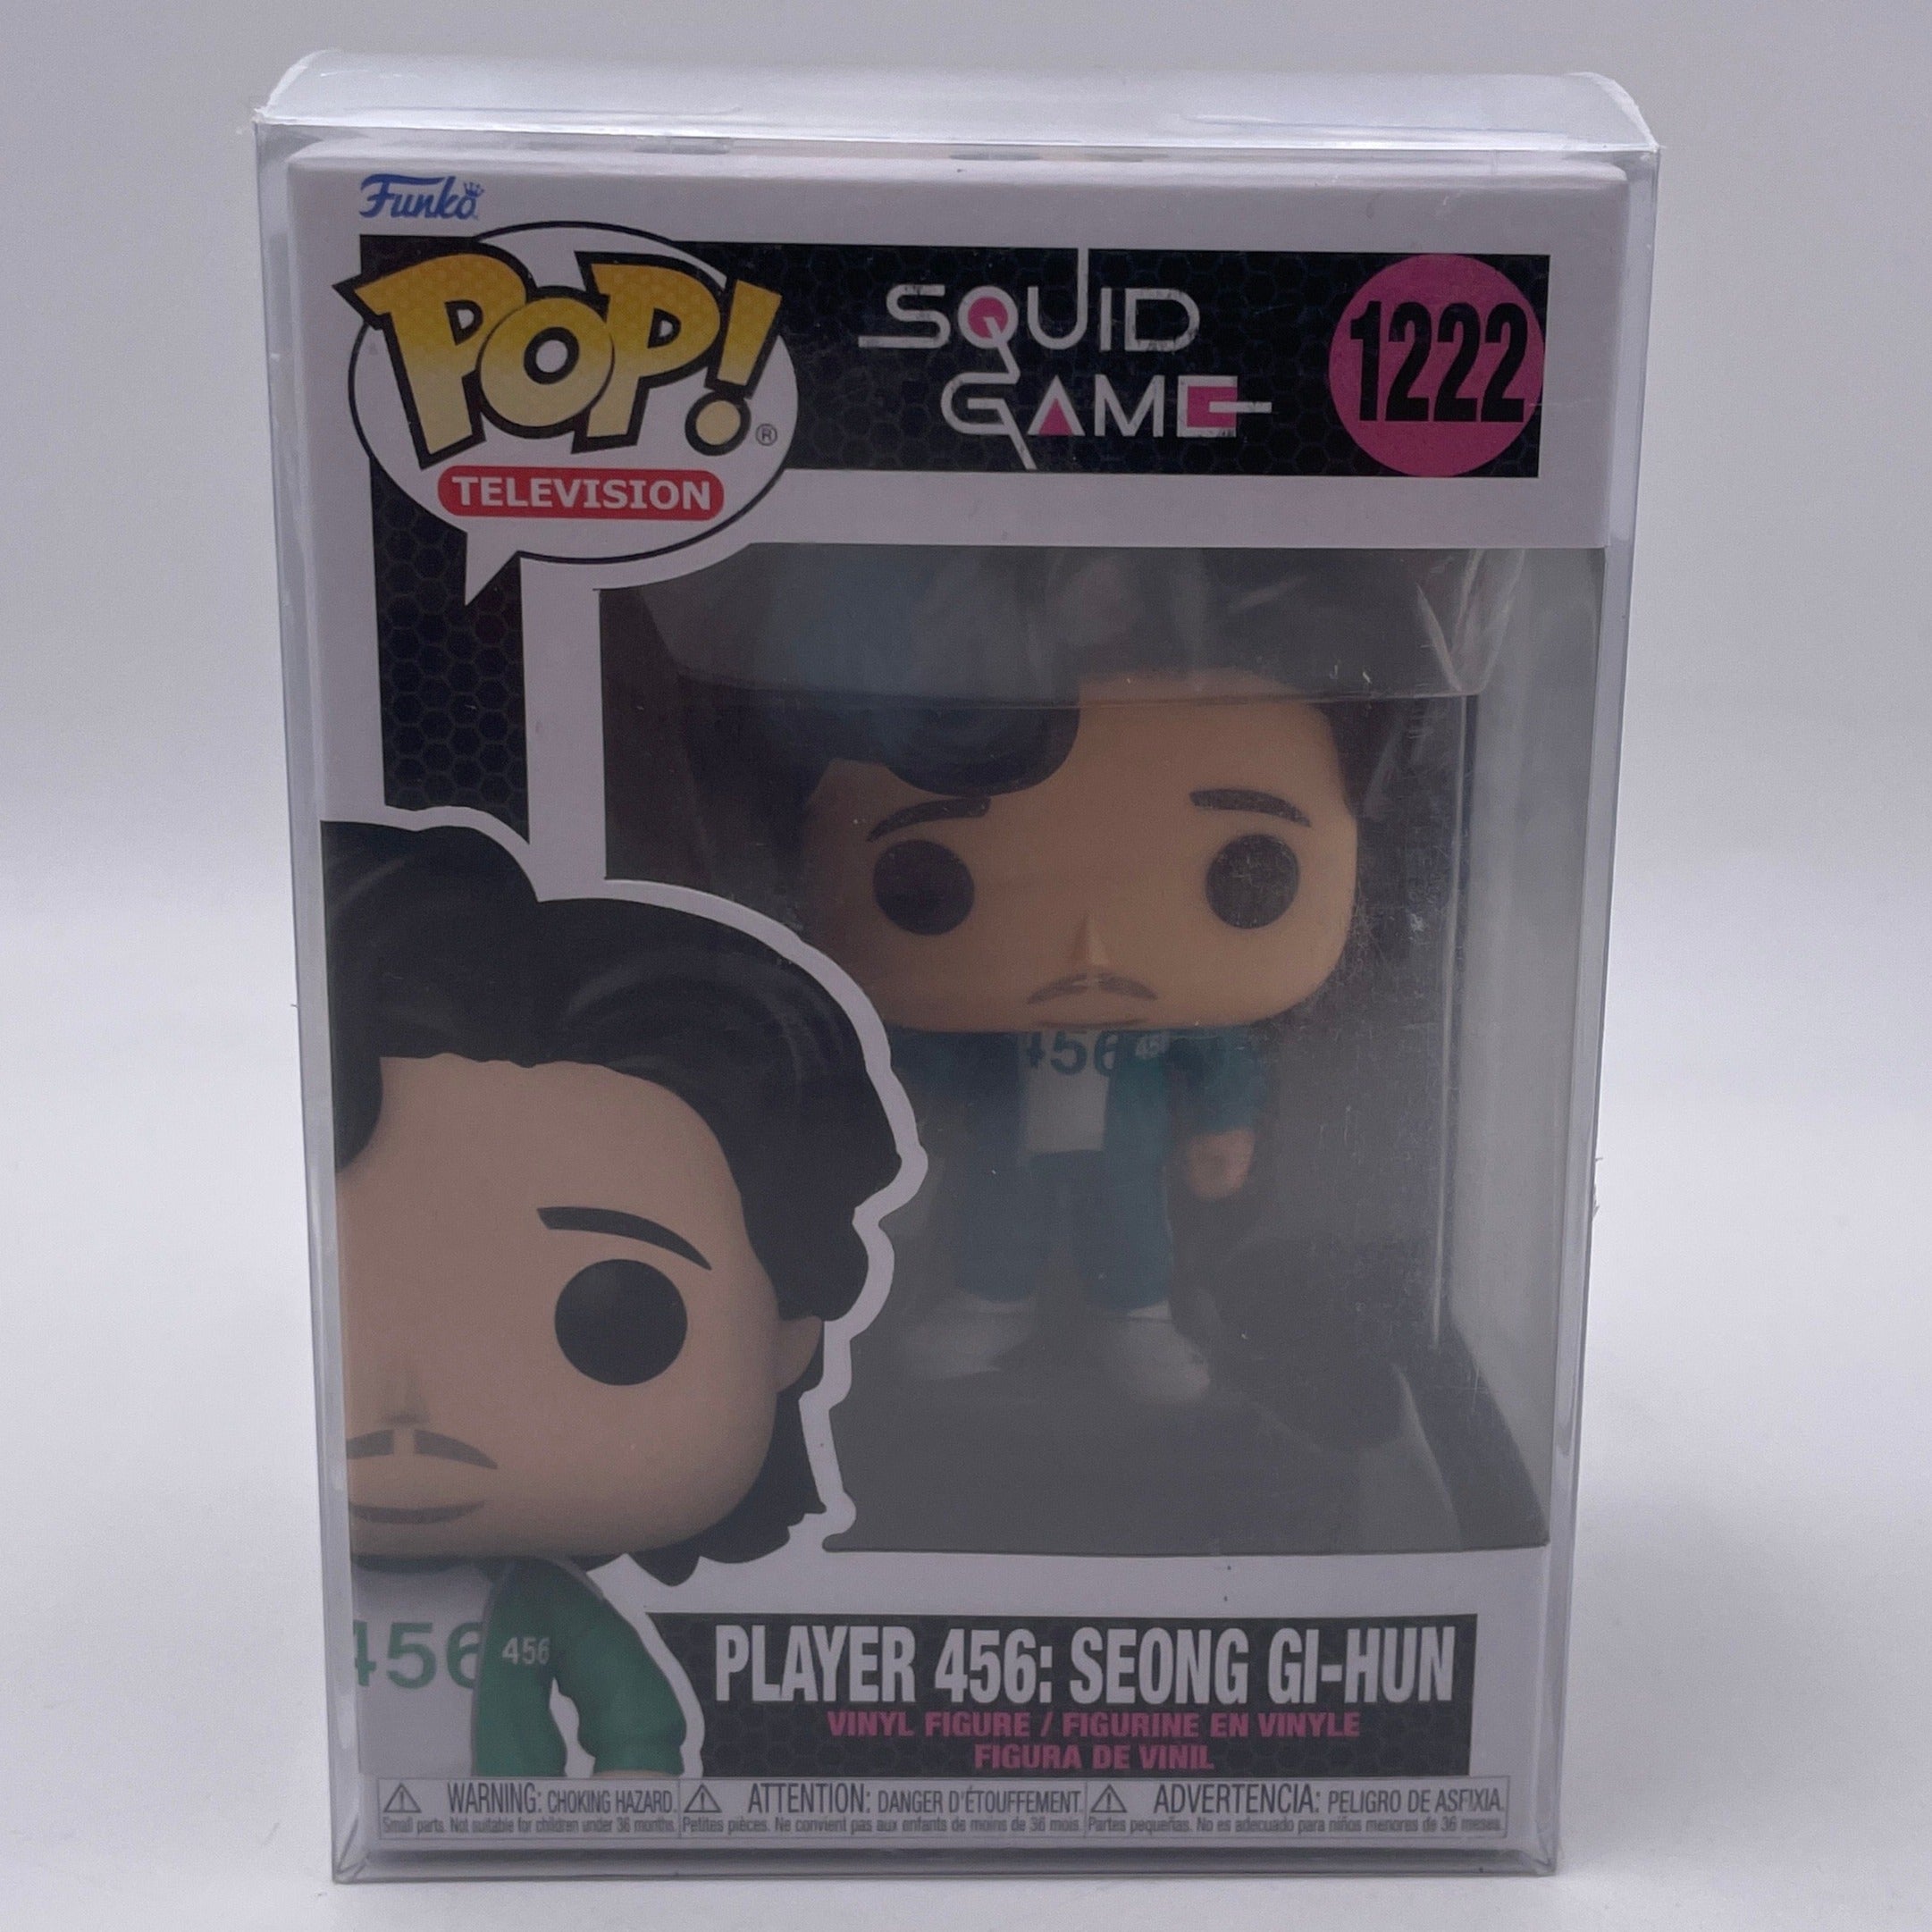 Buy Pop! Player 456 at Funko.